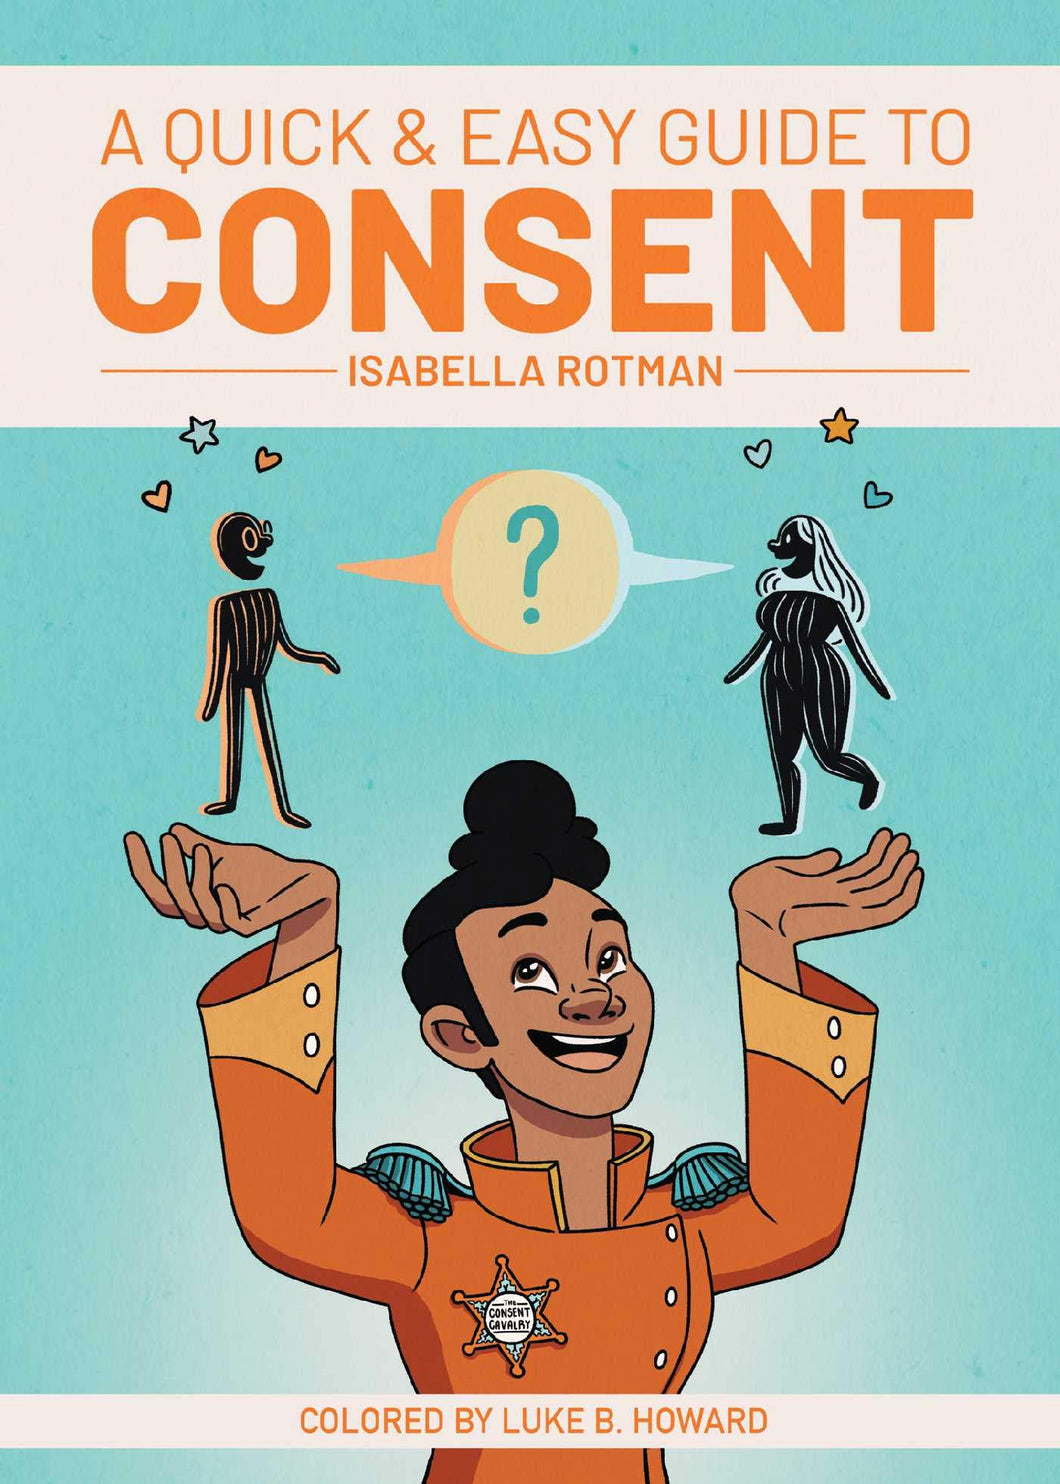 A Quick & Easy Guide to Consent [Isabella Rotman]